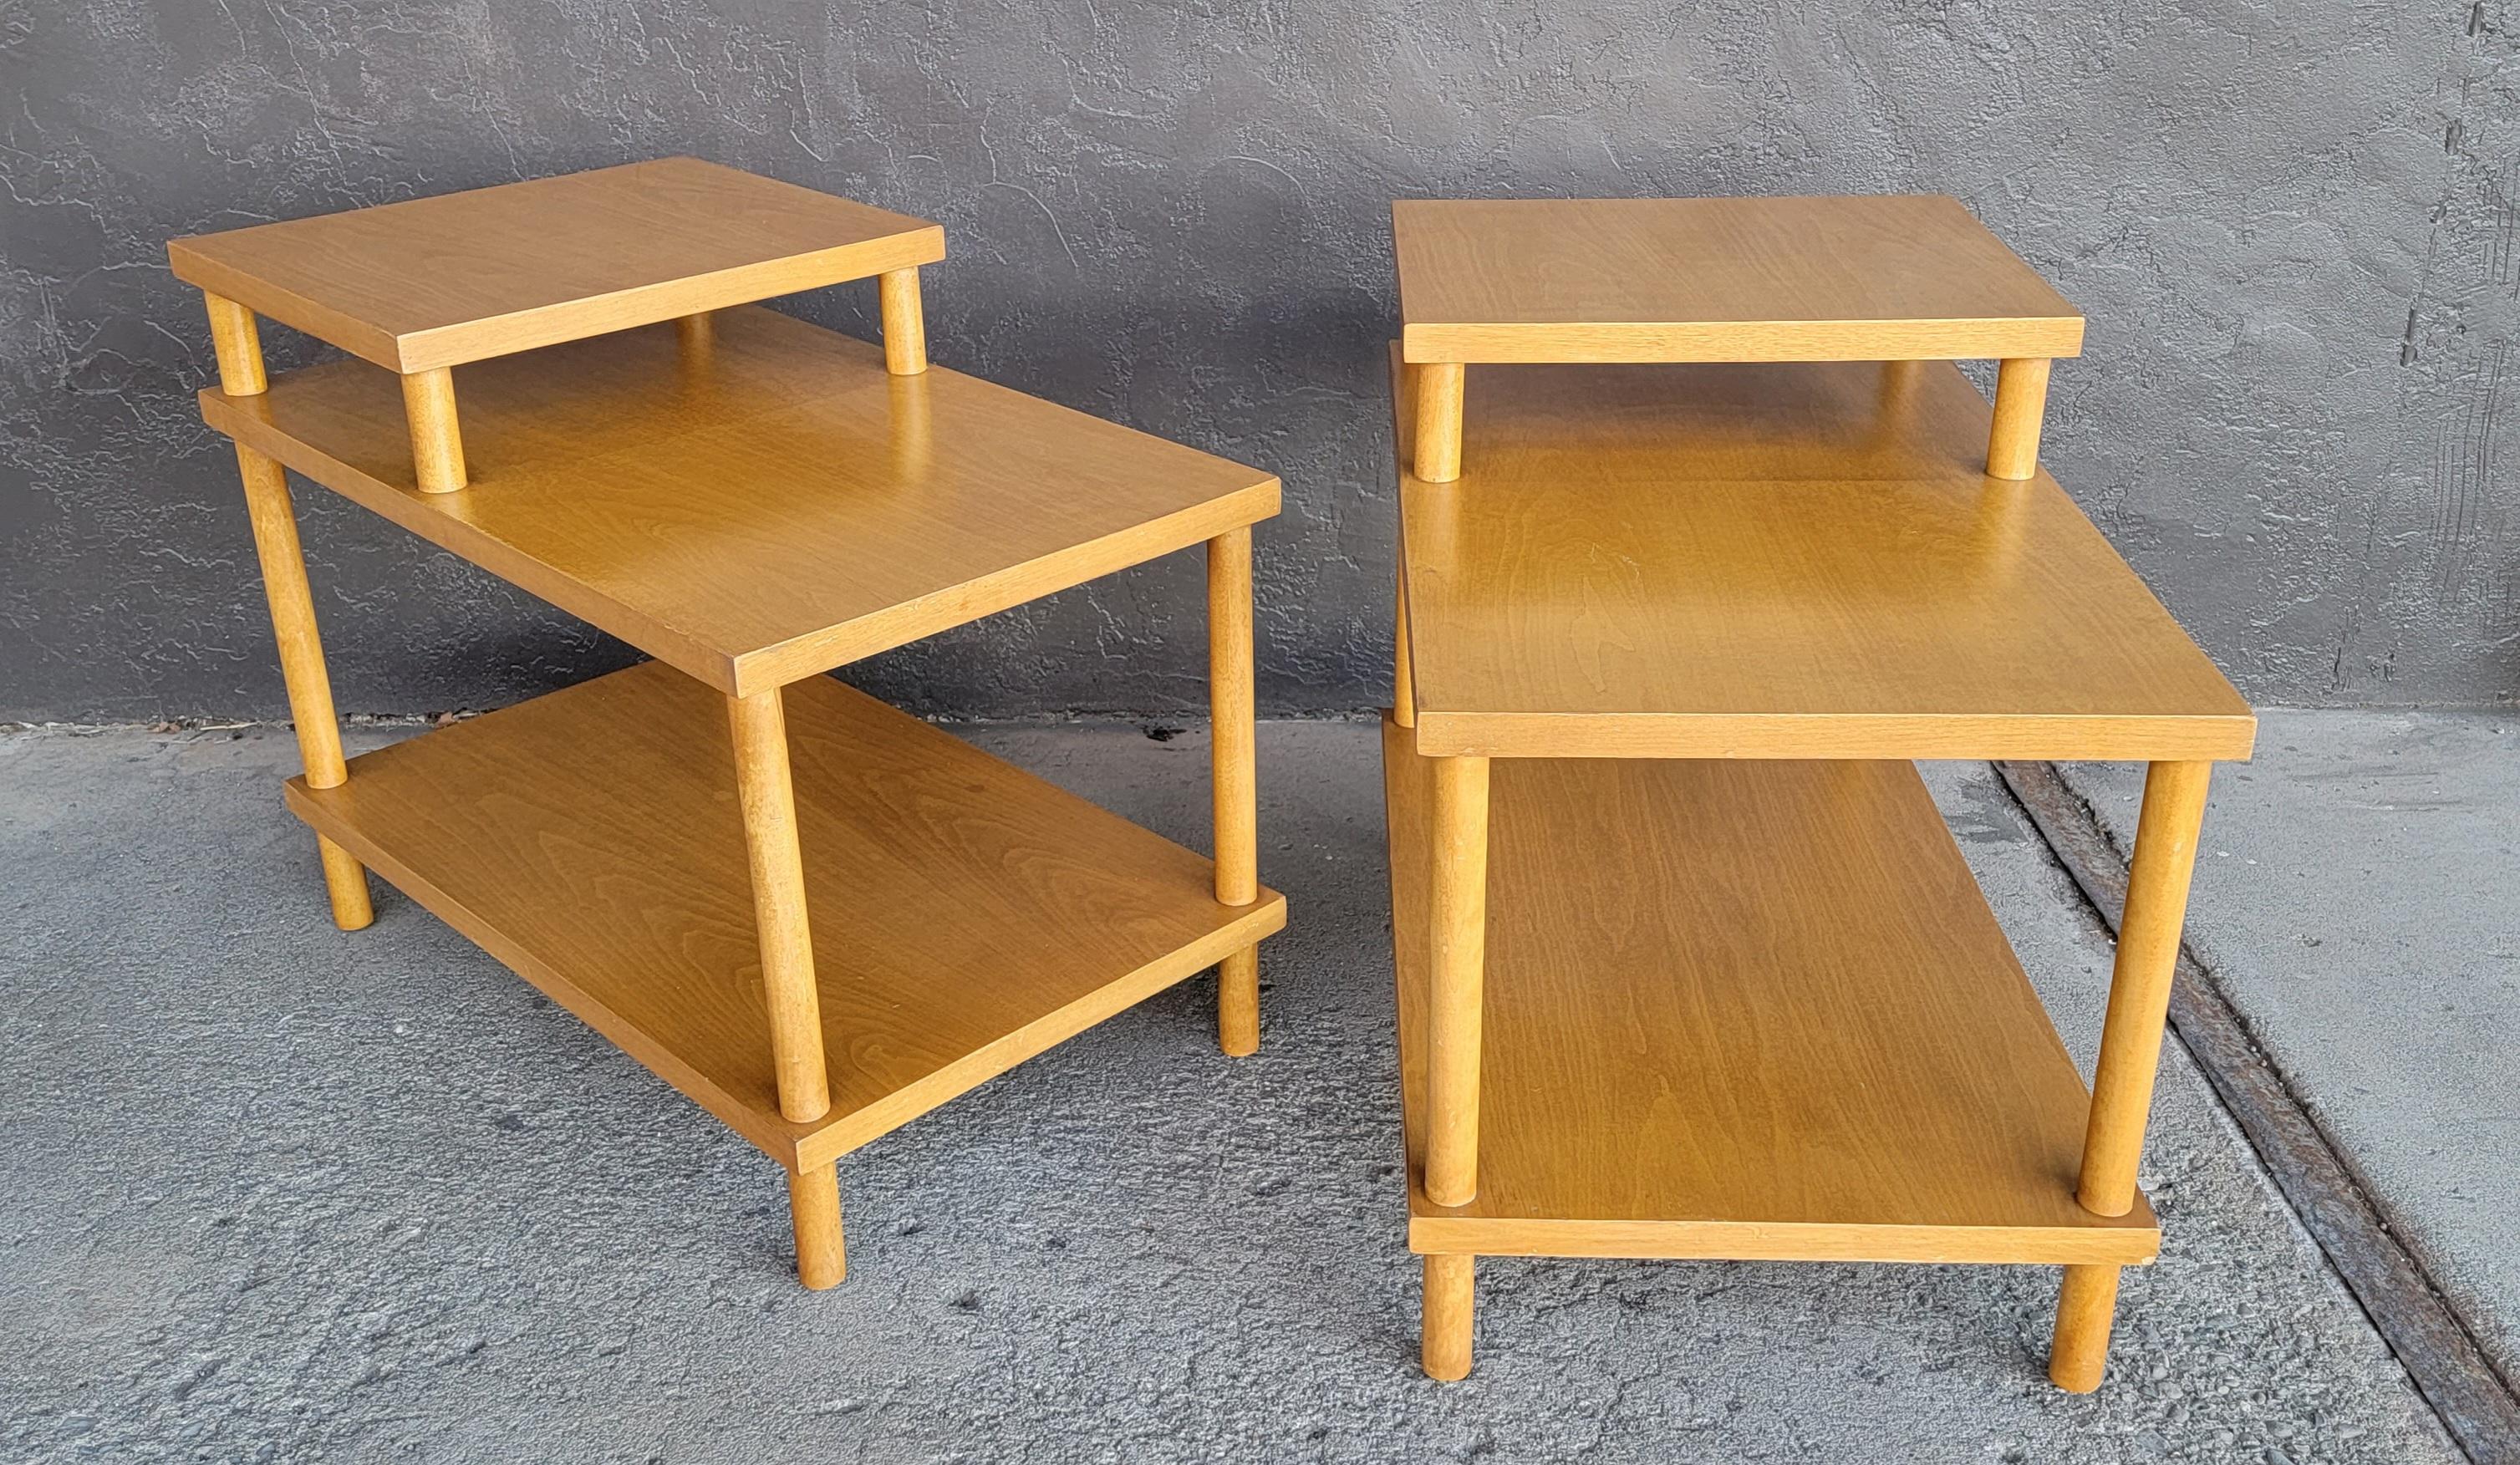 Very nice original finish step-end tables designed by T.H. Robsjohn-Gibbings for Widdicomb Furniture. Circa. 1950's. Both tables retain Robsjohn-Gibbings labels. Three tier tables measuring 24 inches tall, second tier measures 18.25 inches tall.